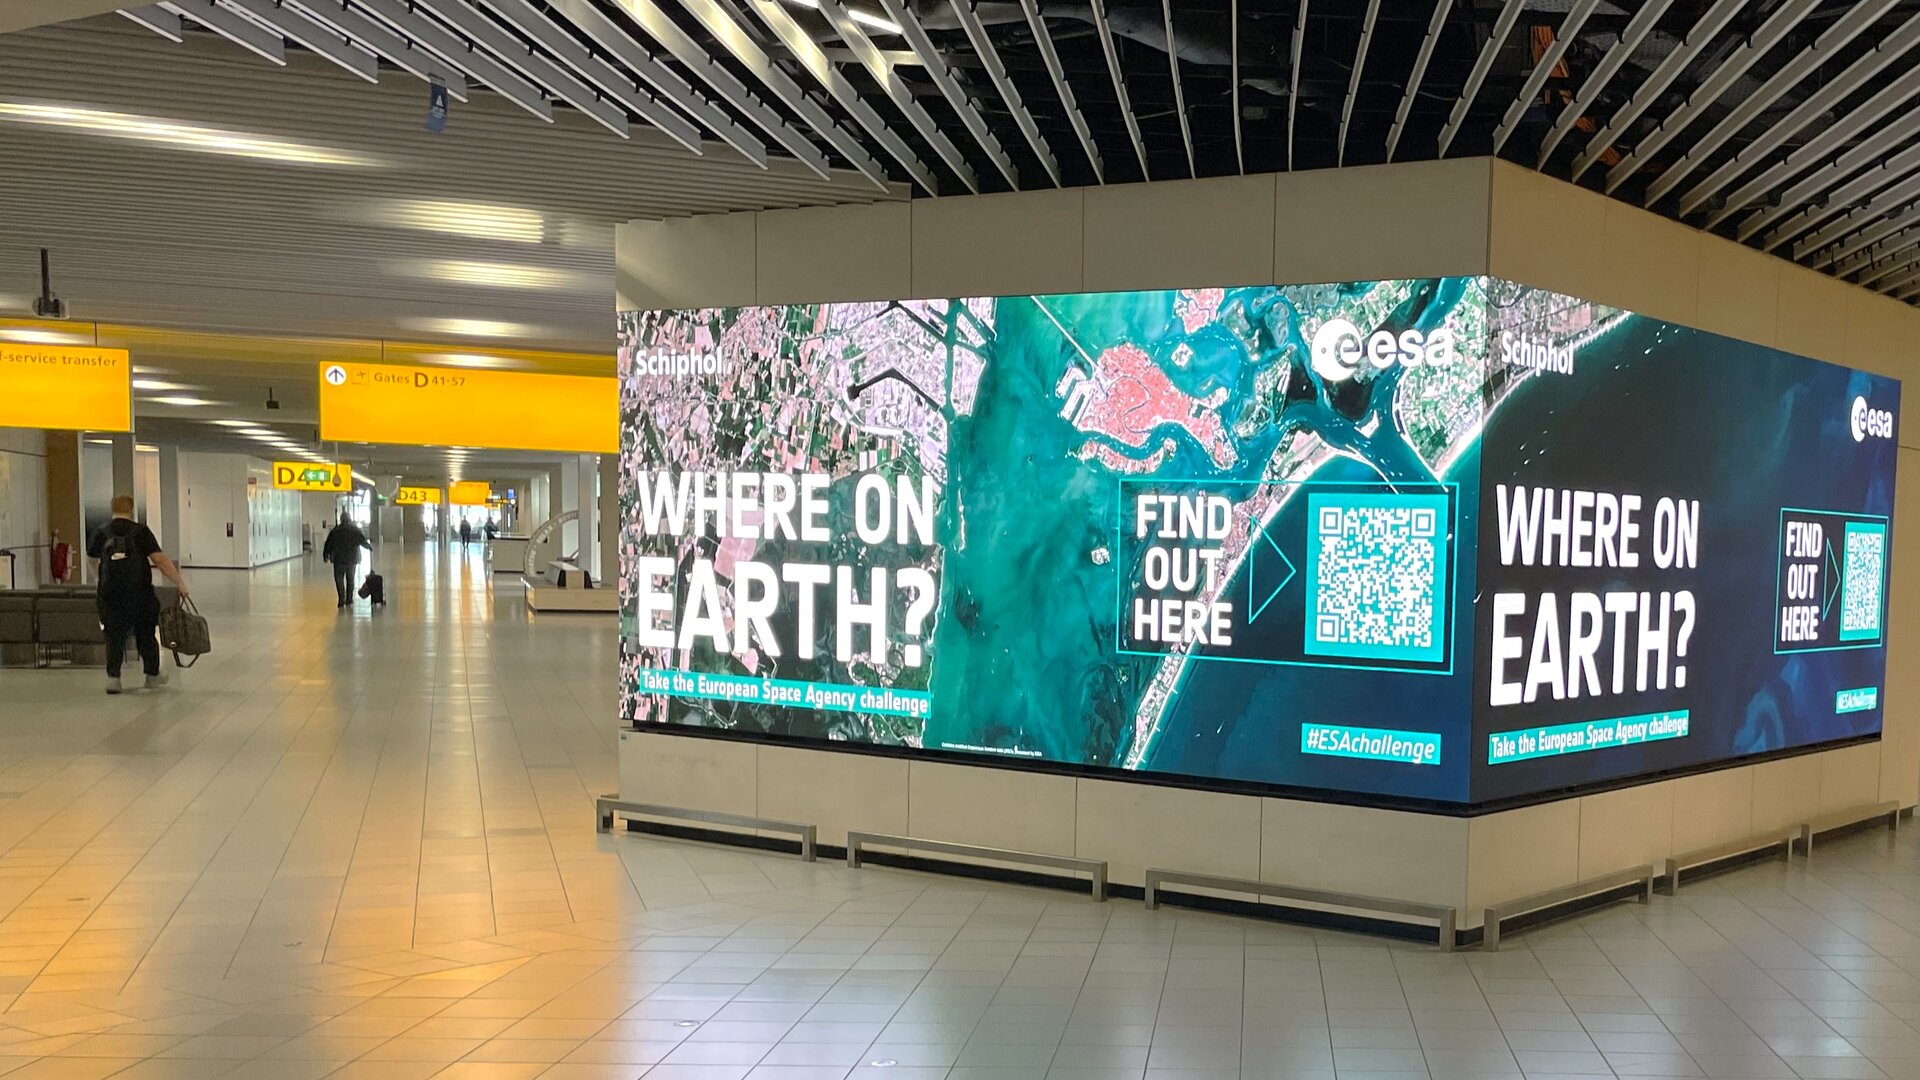 ESA X Schiphol 'Where on Earth?' travel quiz campaign banner image